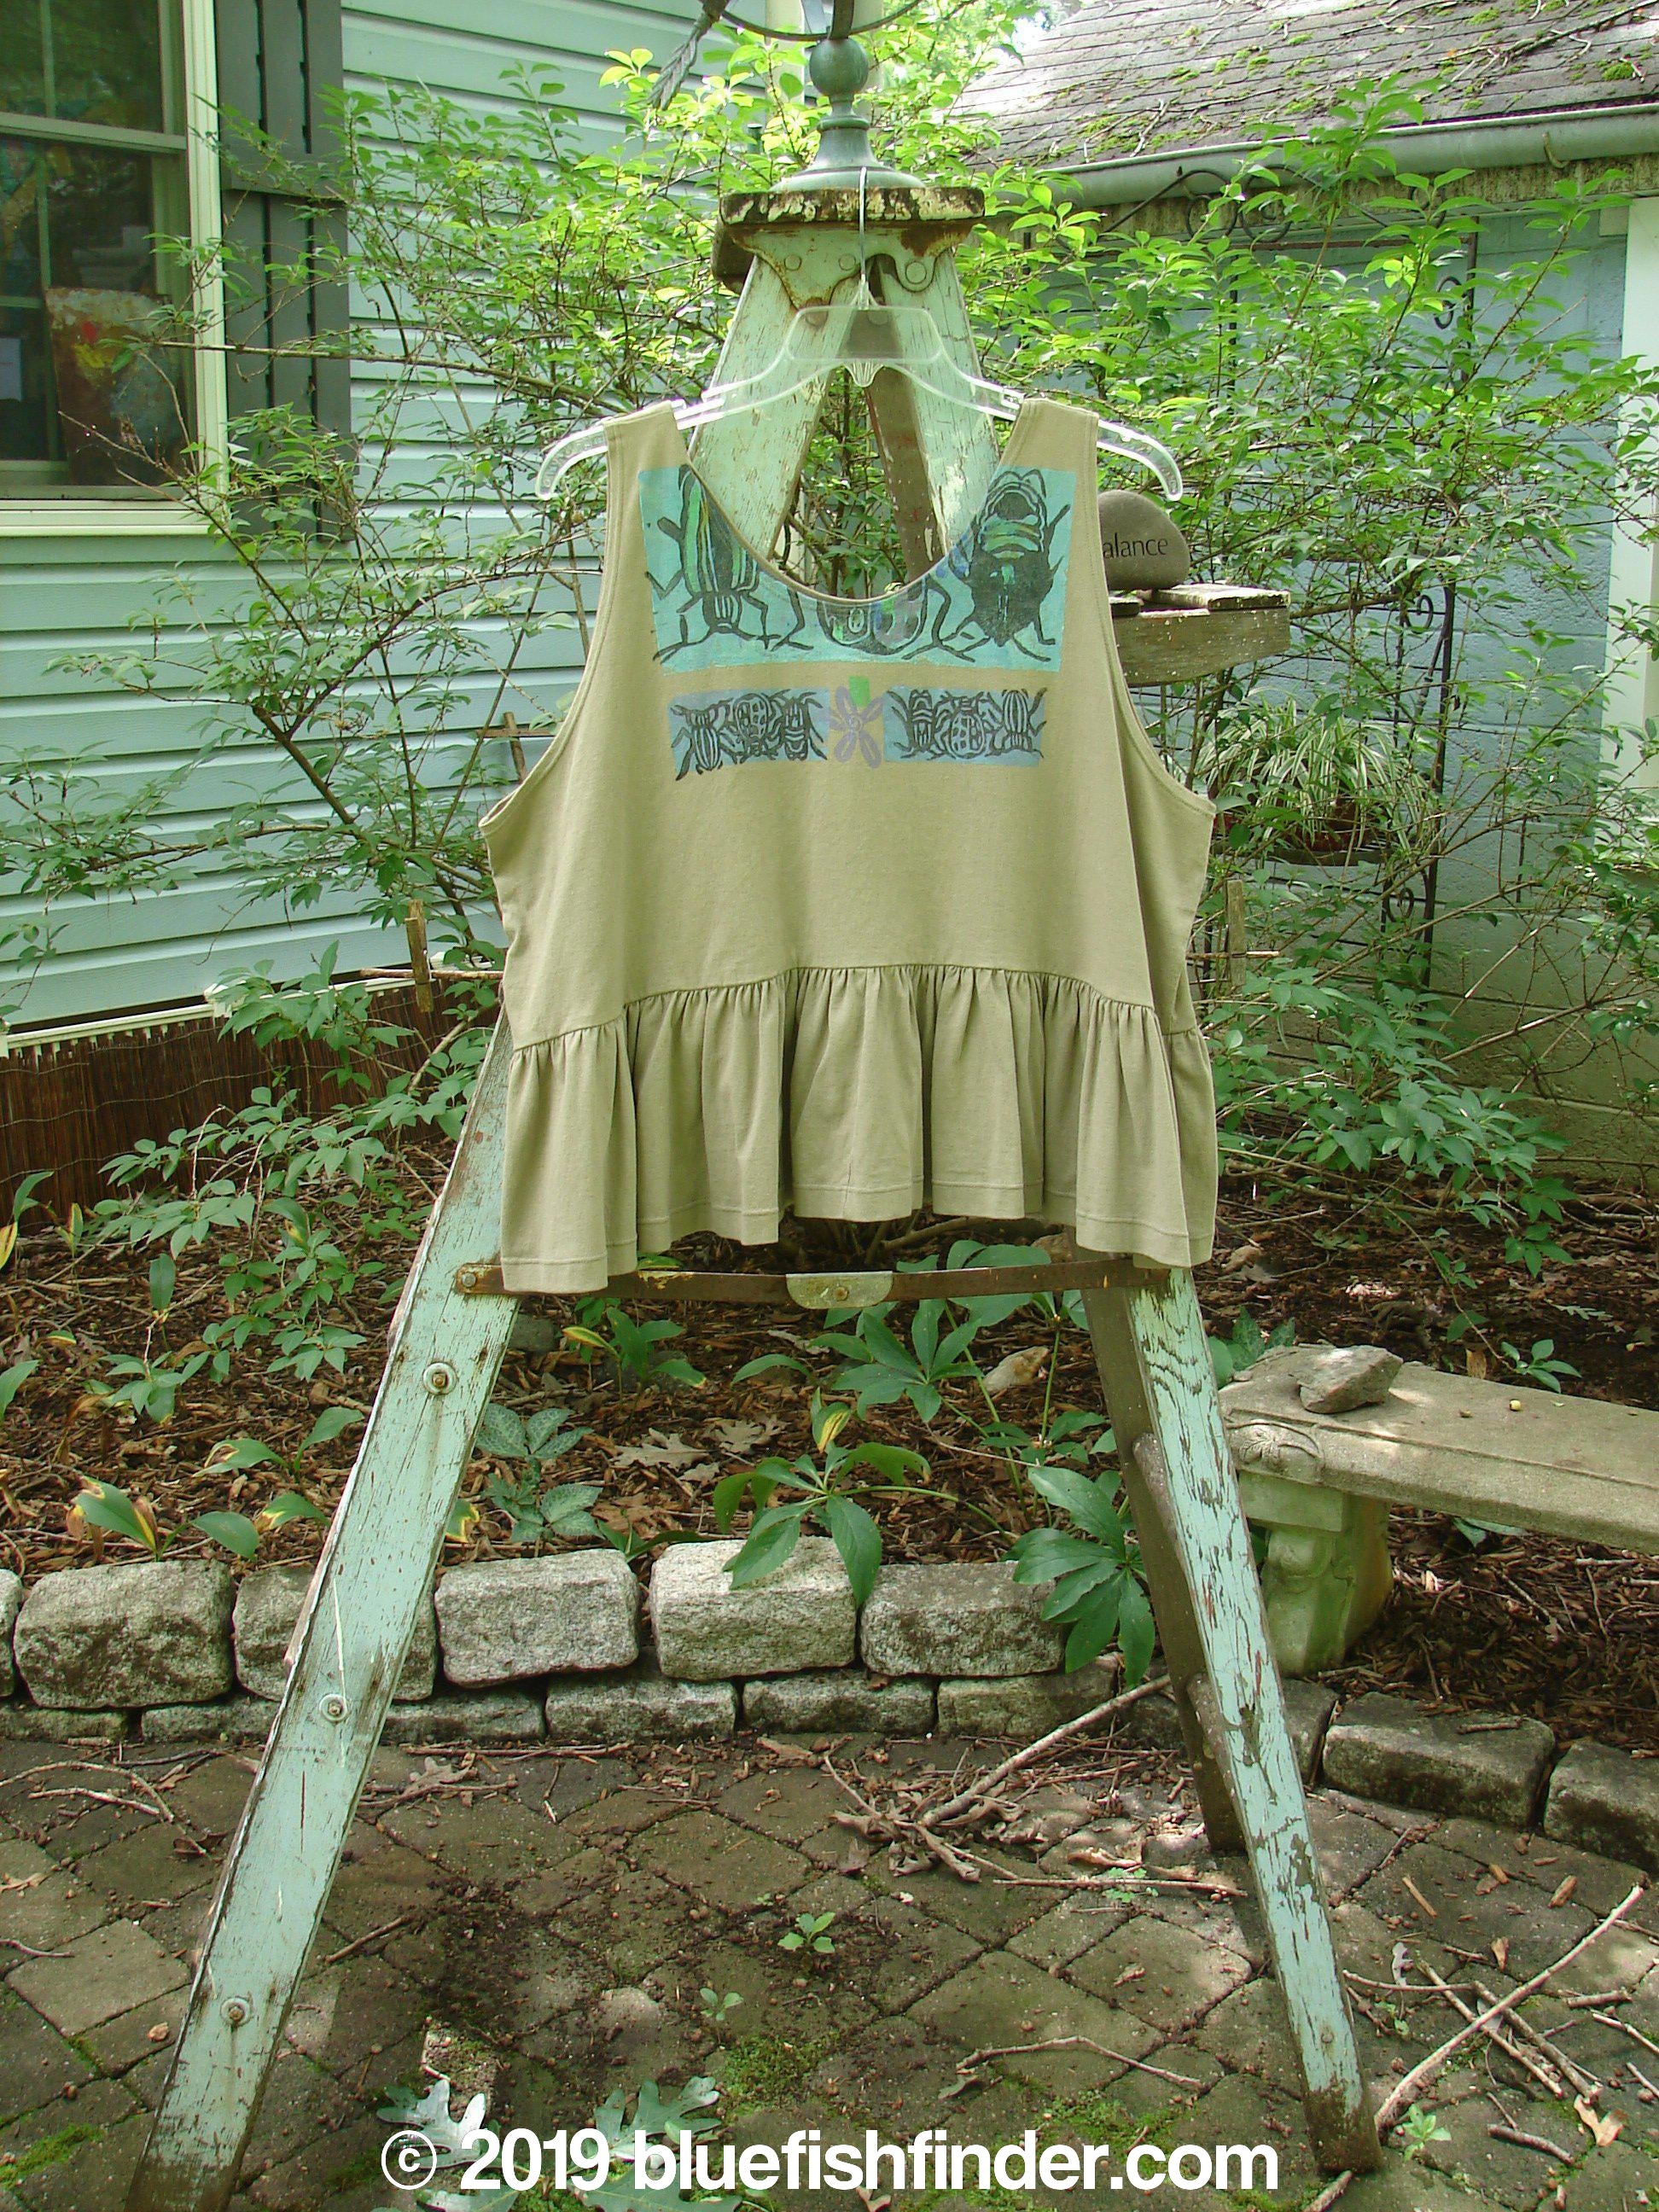 1992 Peplum Top Beetle Wheat OSFA: A rare vintage flounce top with a wide waist, yoked waist seam, and a huge gathered bottom flounce. Patched and painted in a vintage beetle theme.